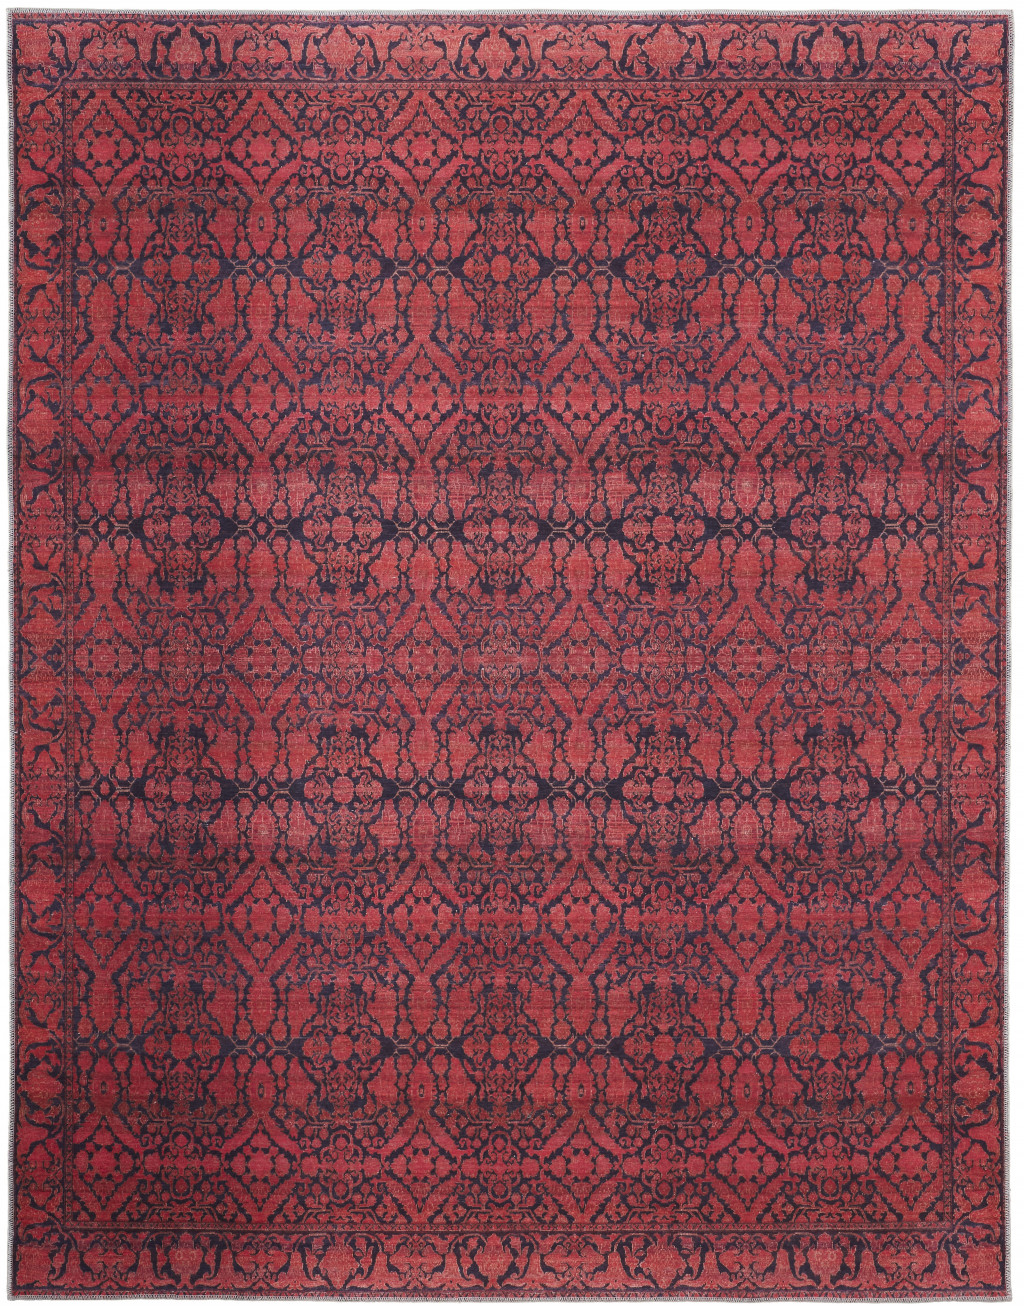 10' X 14' Red And Black Floral Power Loom Area Rug-515200-1